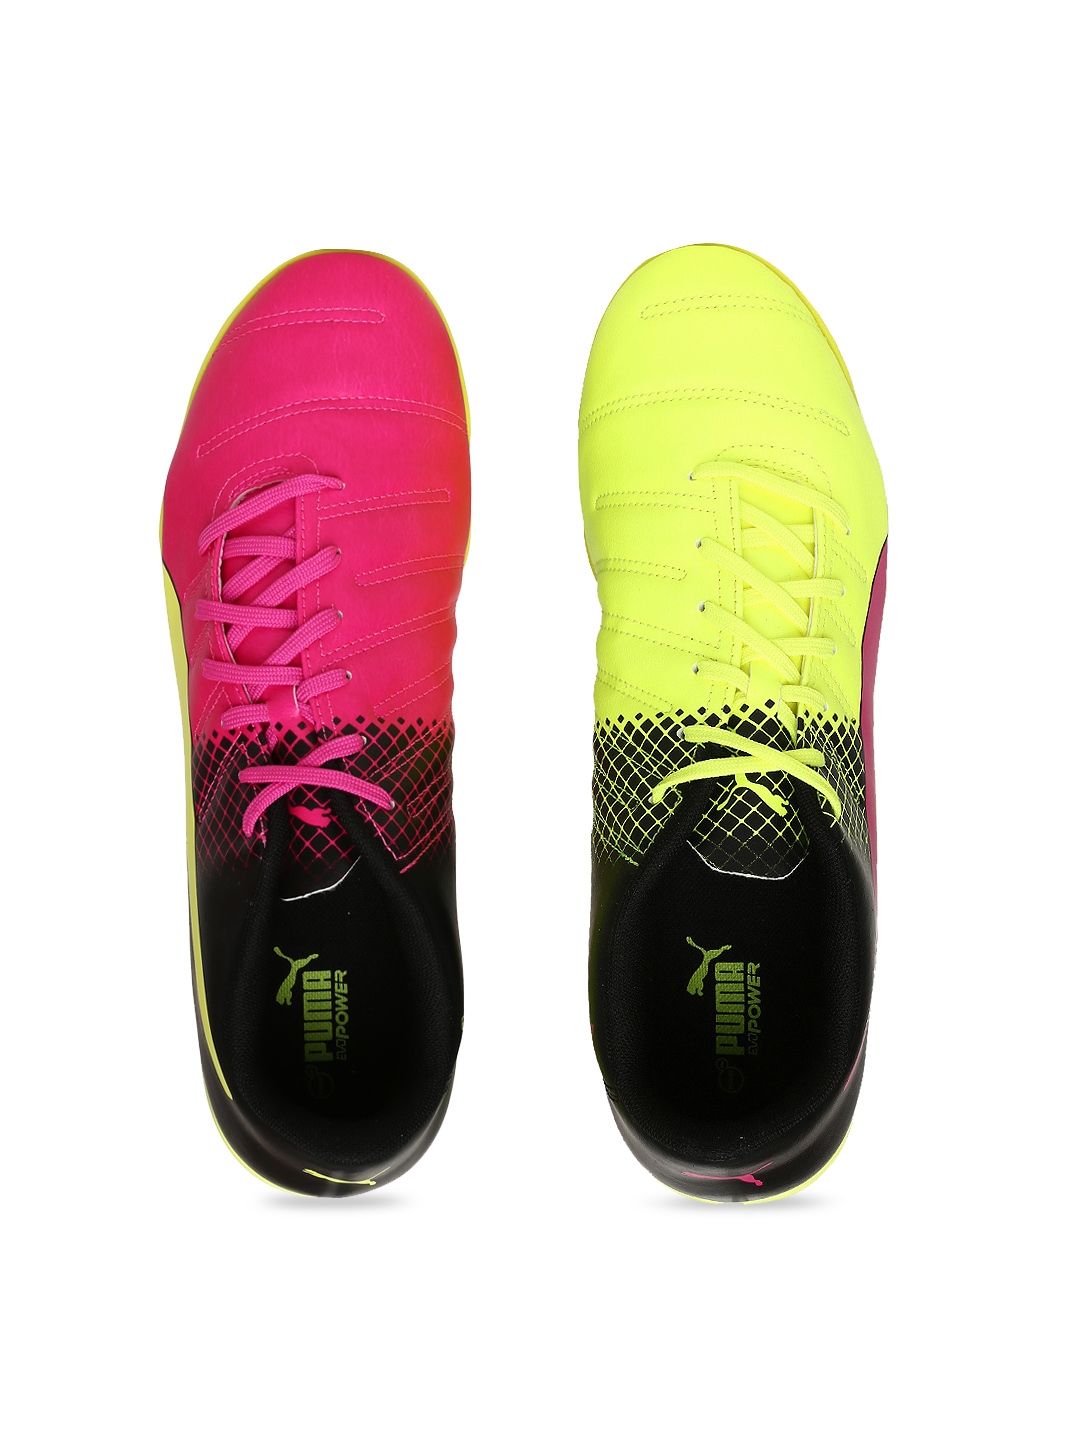 puma pink fluorescent green shoes,Free 